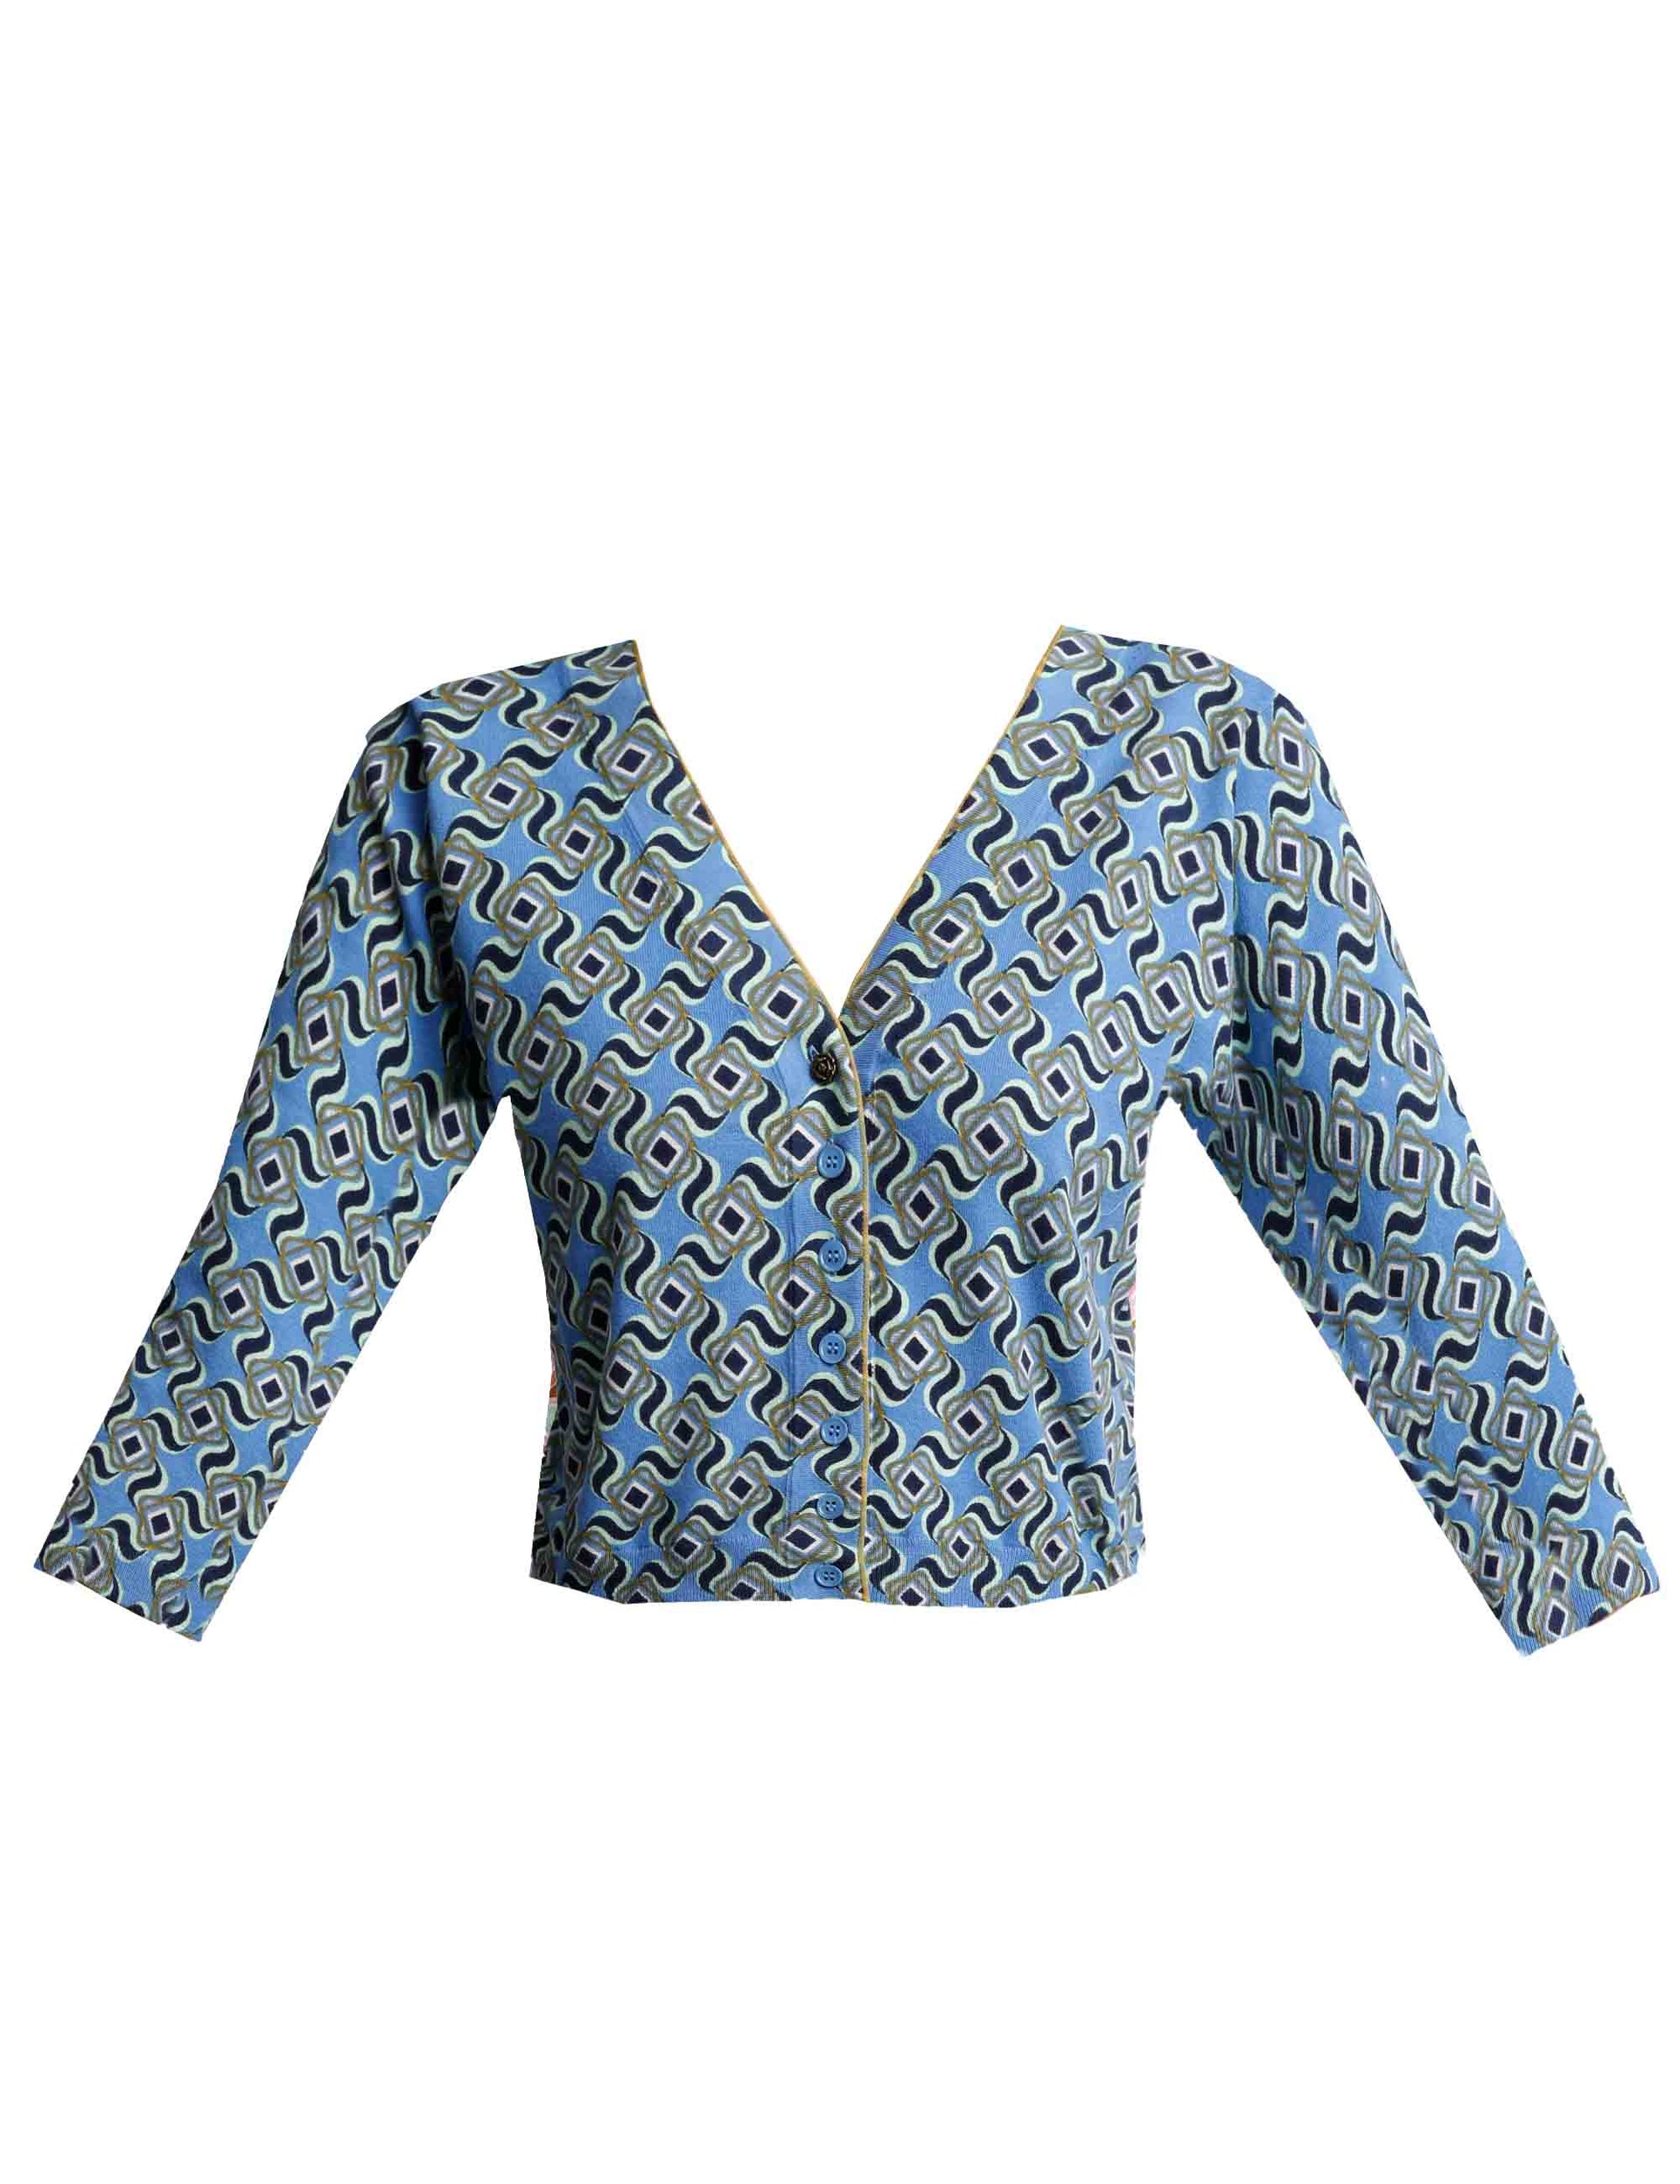 Printed women's cardigan sweaters in blue cotton with 3/4 sleeves